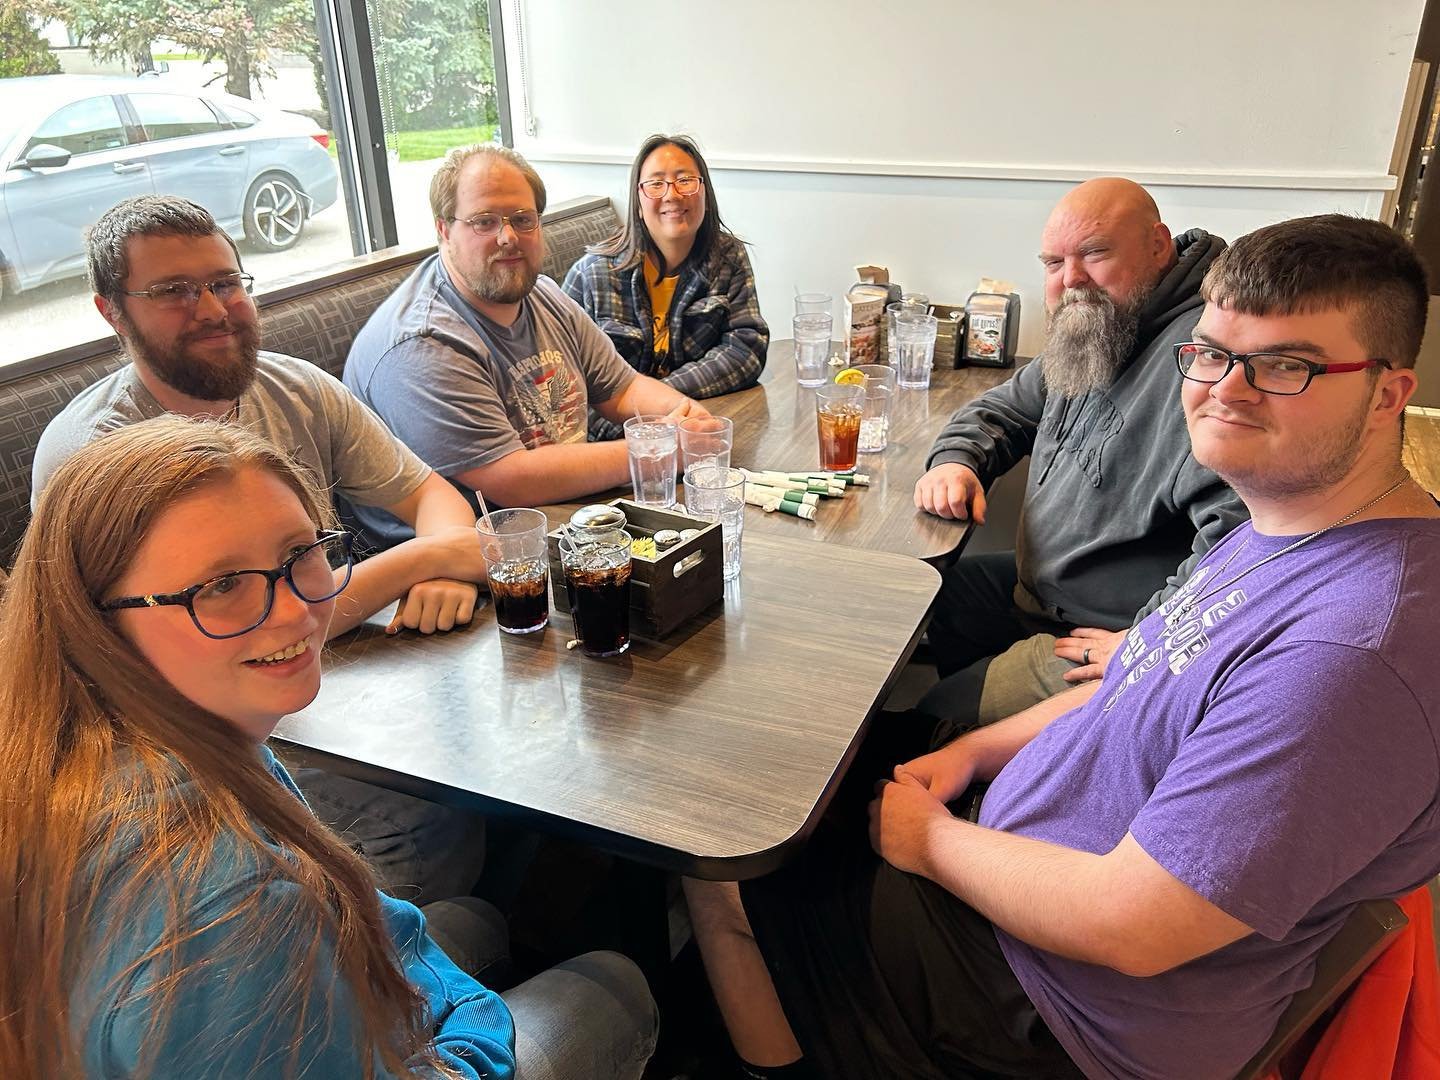 Our Young Adults love hanging out together. If you&rsquo;re looking for community with a group of friends who love God and each other, then fill out a Connect Card and we&rsquo;ll route you to Todd &amp; Heather Mefferd, our Heritage YA leaders. ❤️👇